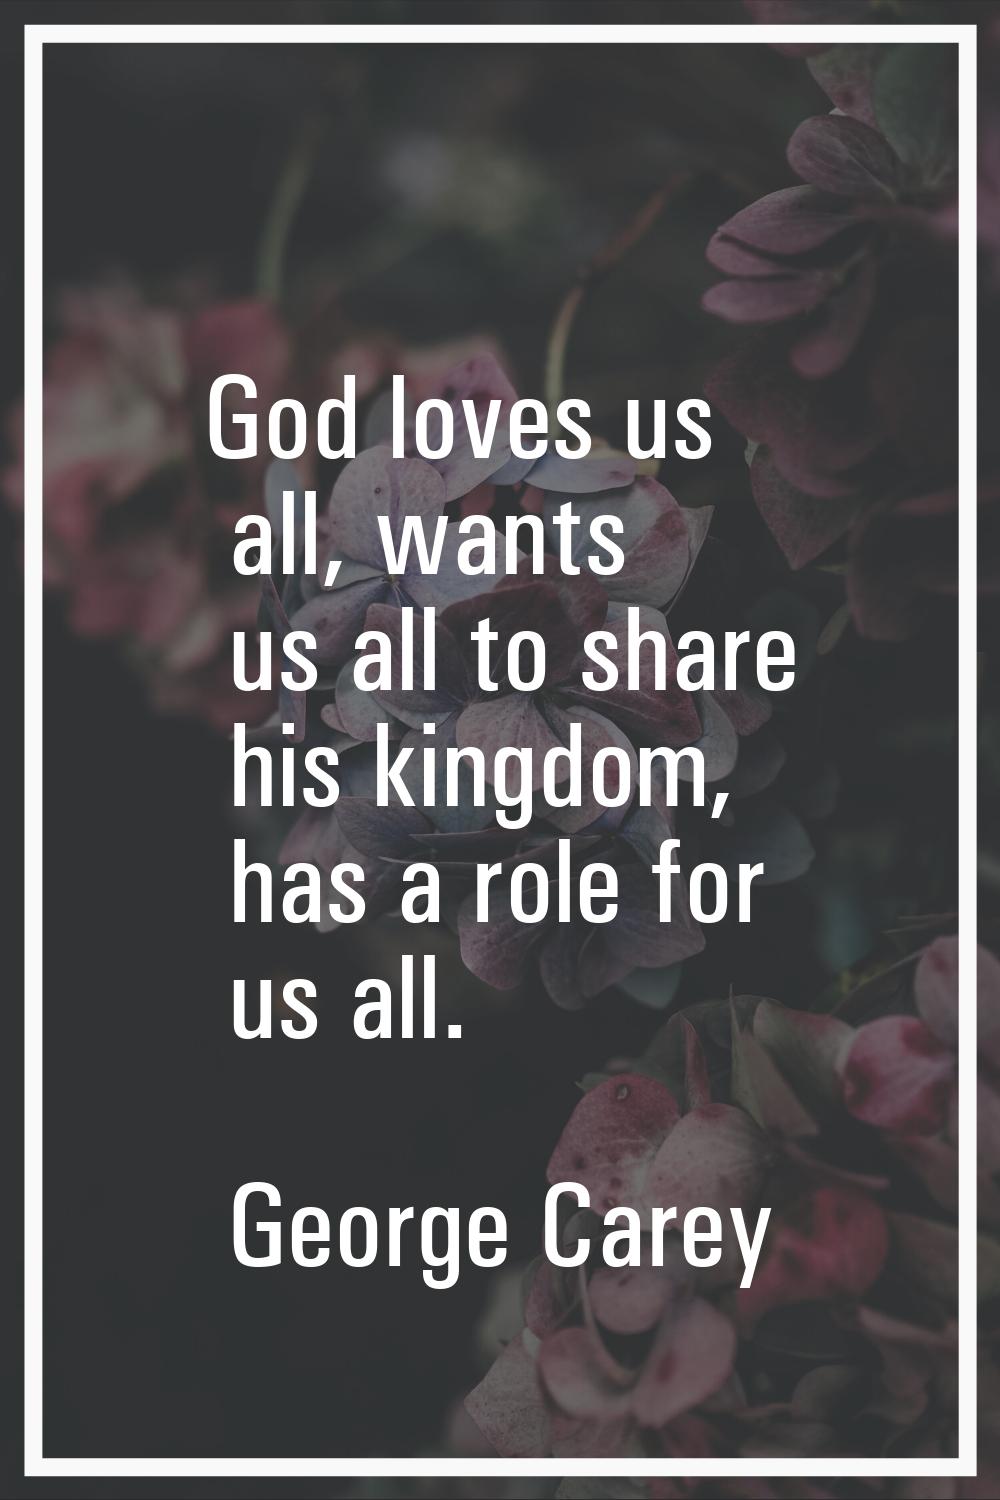 God loves us all, wants us all to share his kingdom, has a role for us all.